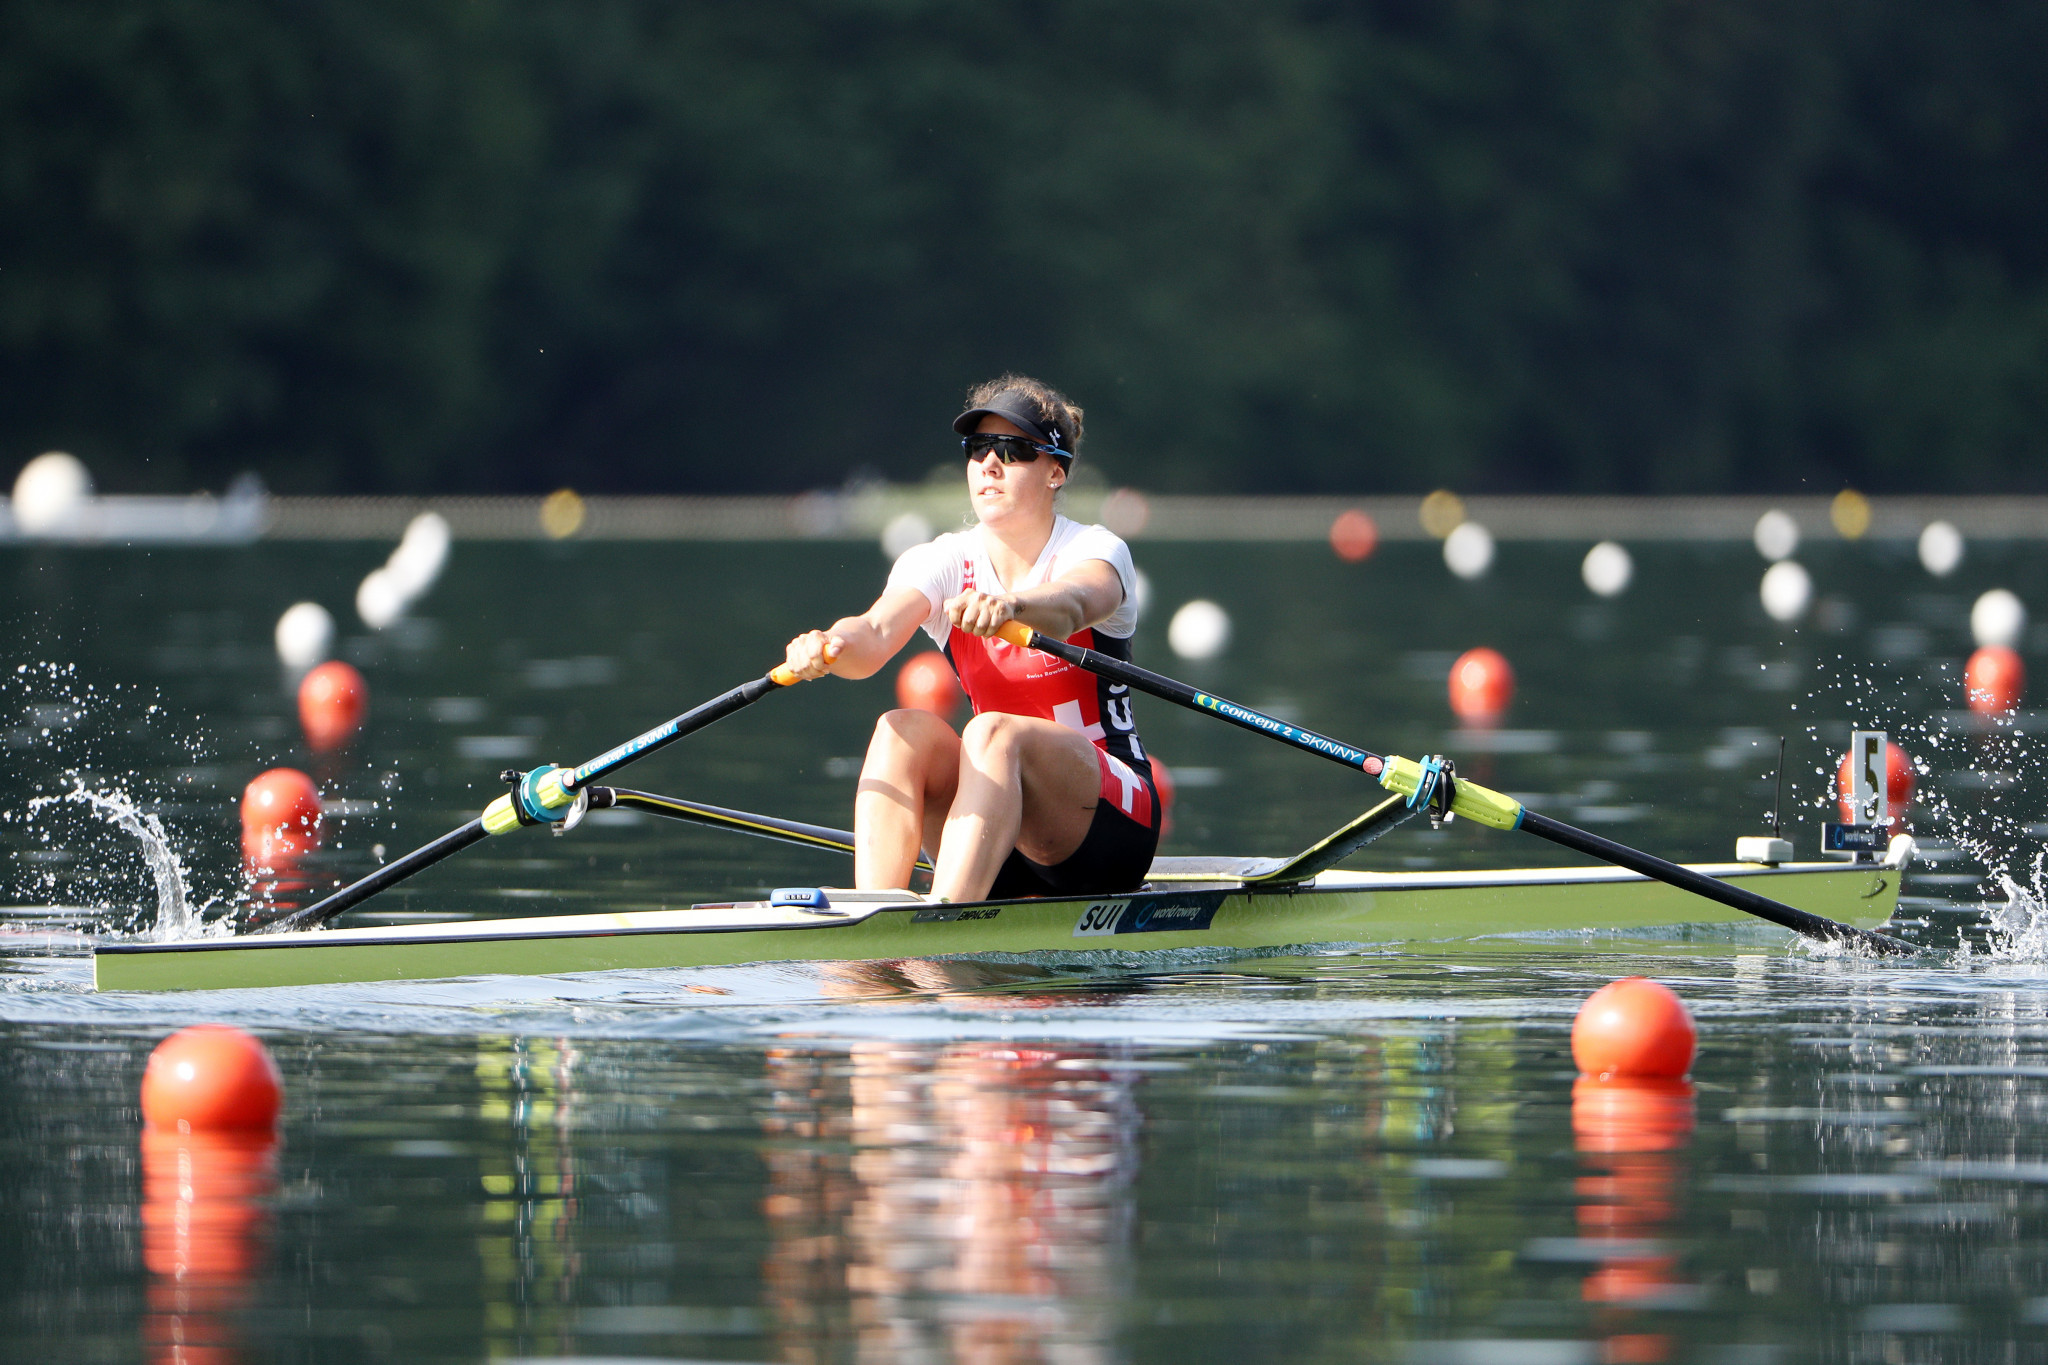 Switzerland’s Jeannine Gmelin took first place in her heat in the women's singles sculls ©Getty Images